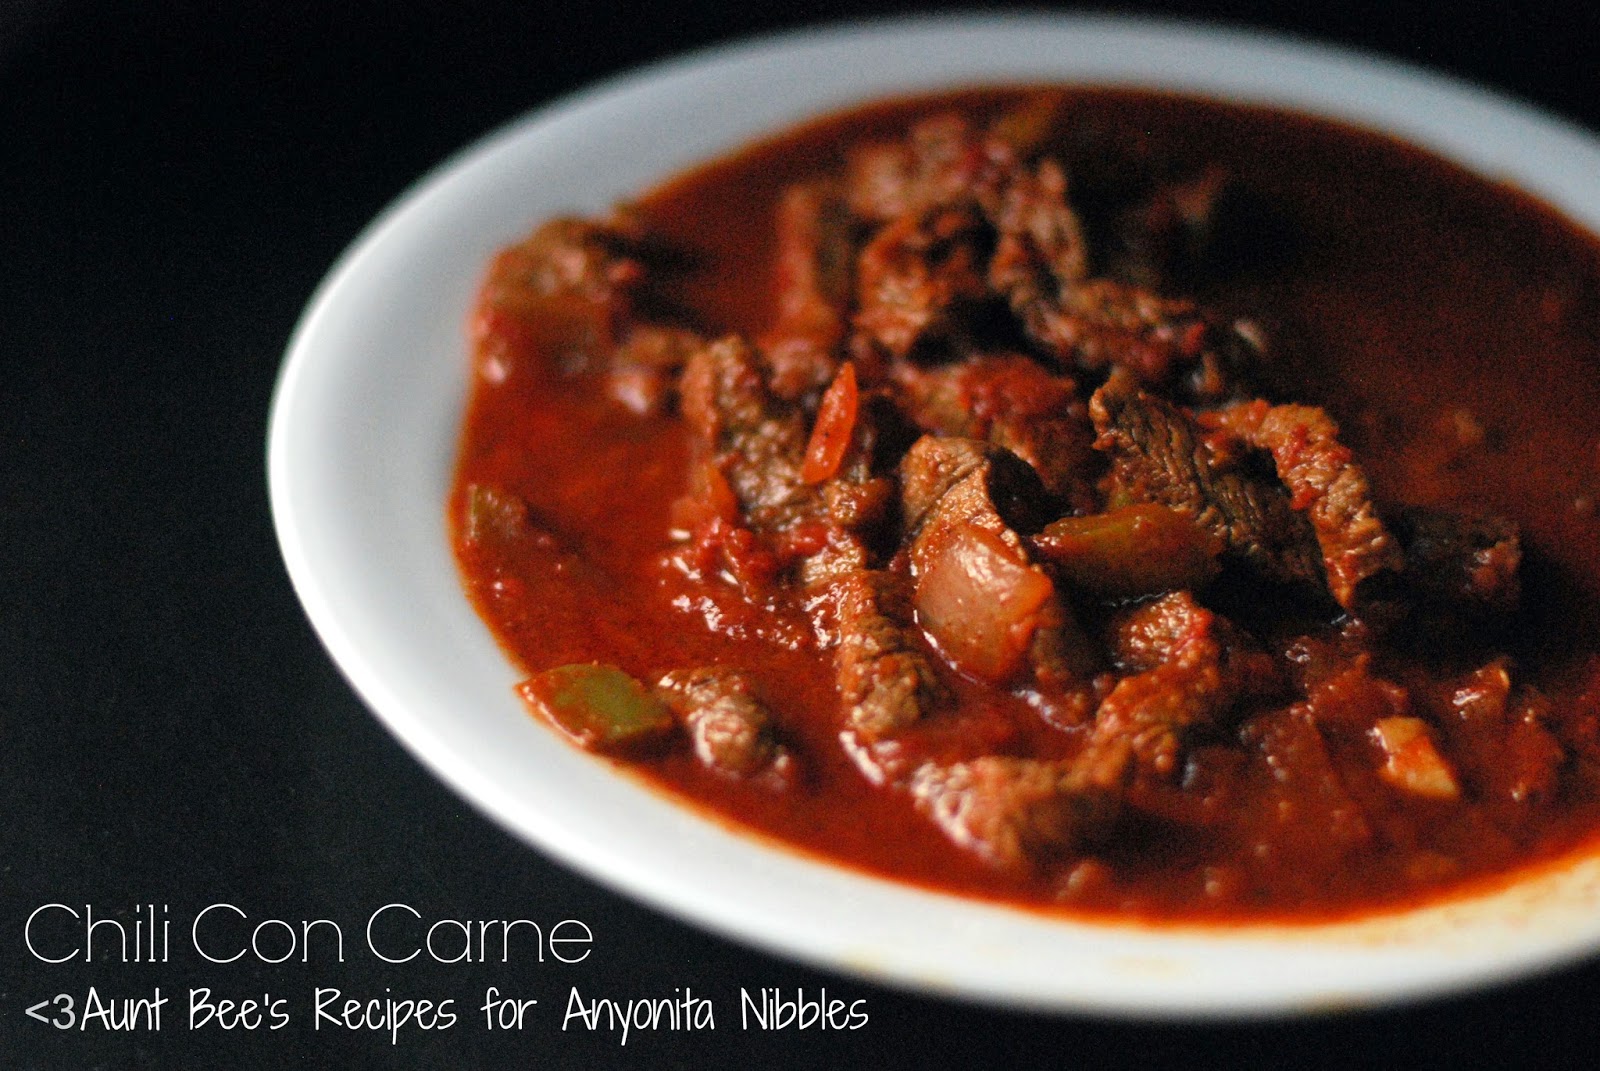 Chili Con Carne | Aunt Bee's Recipes for Anyonita Nibbles